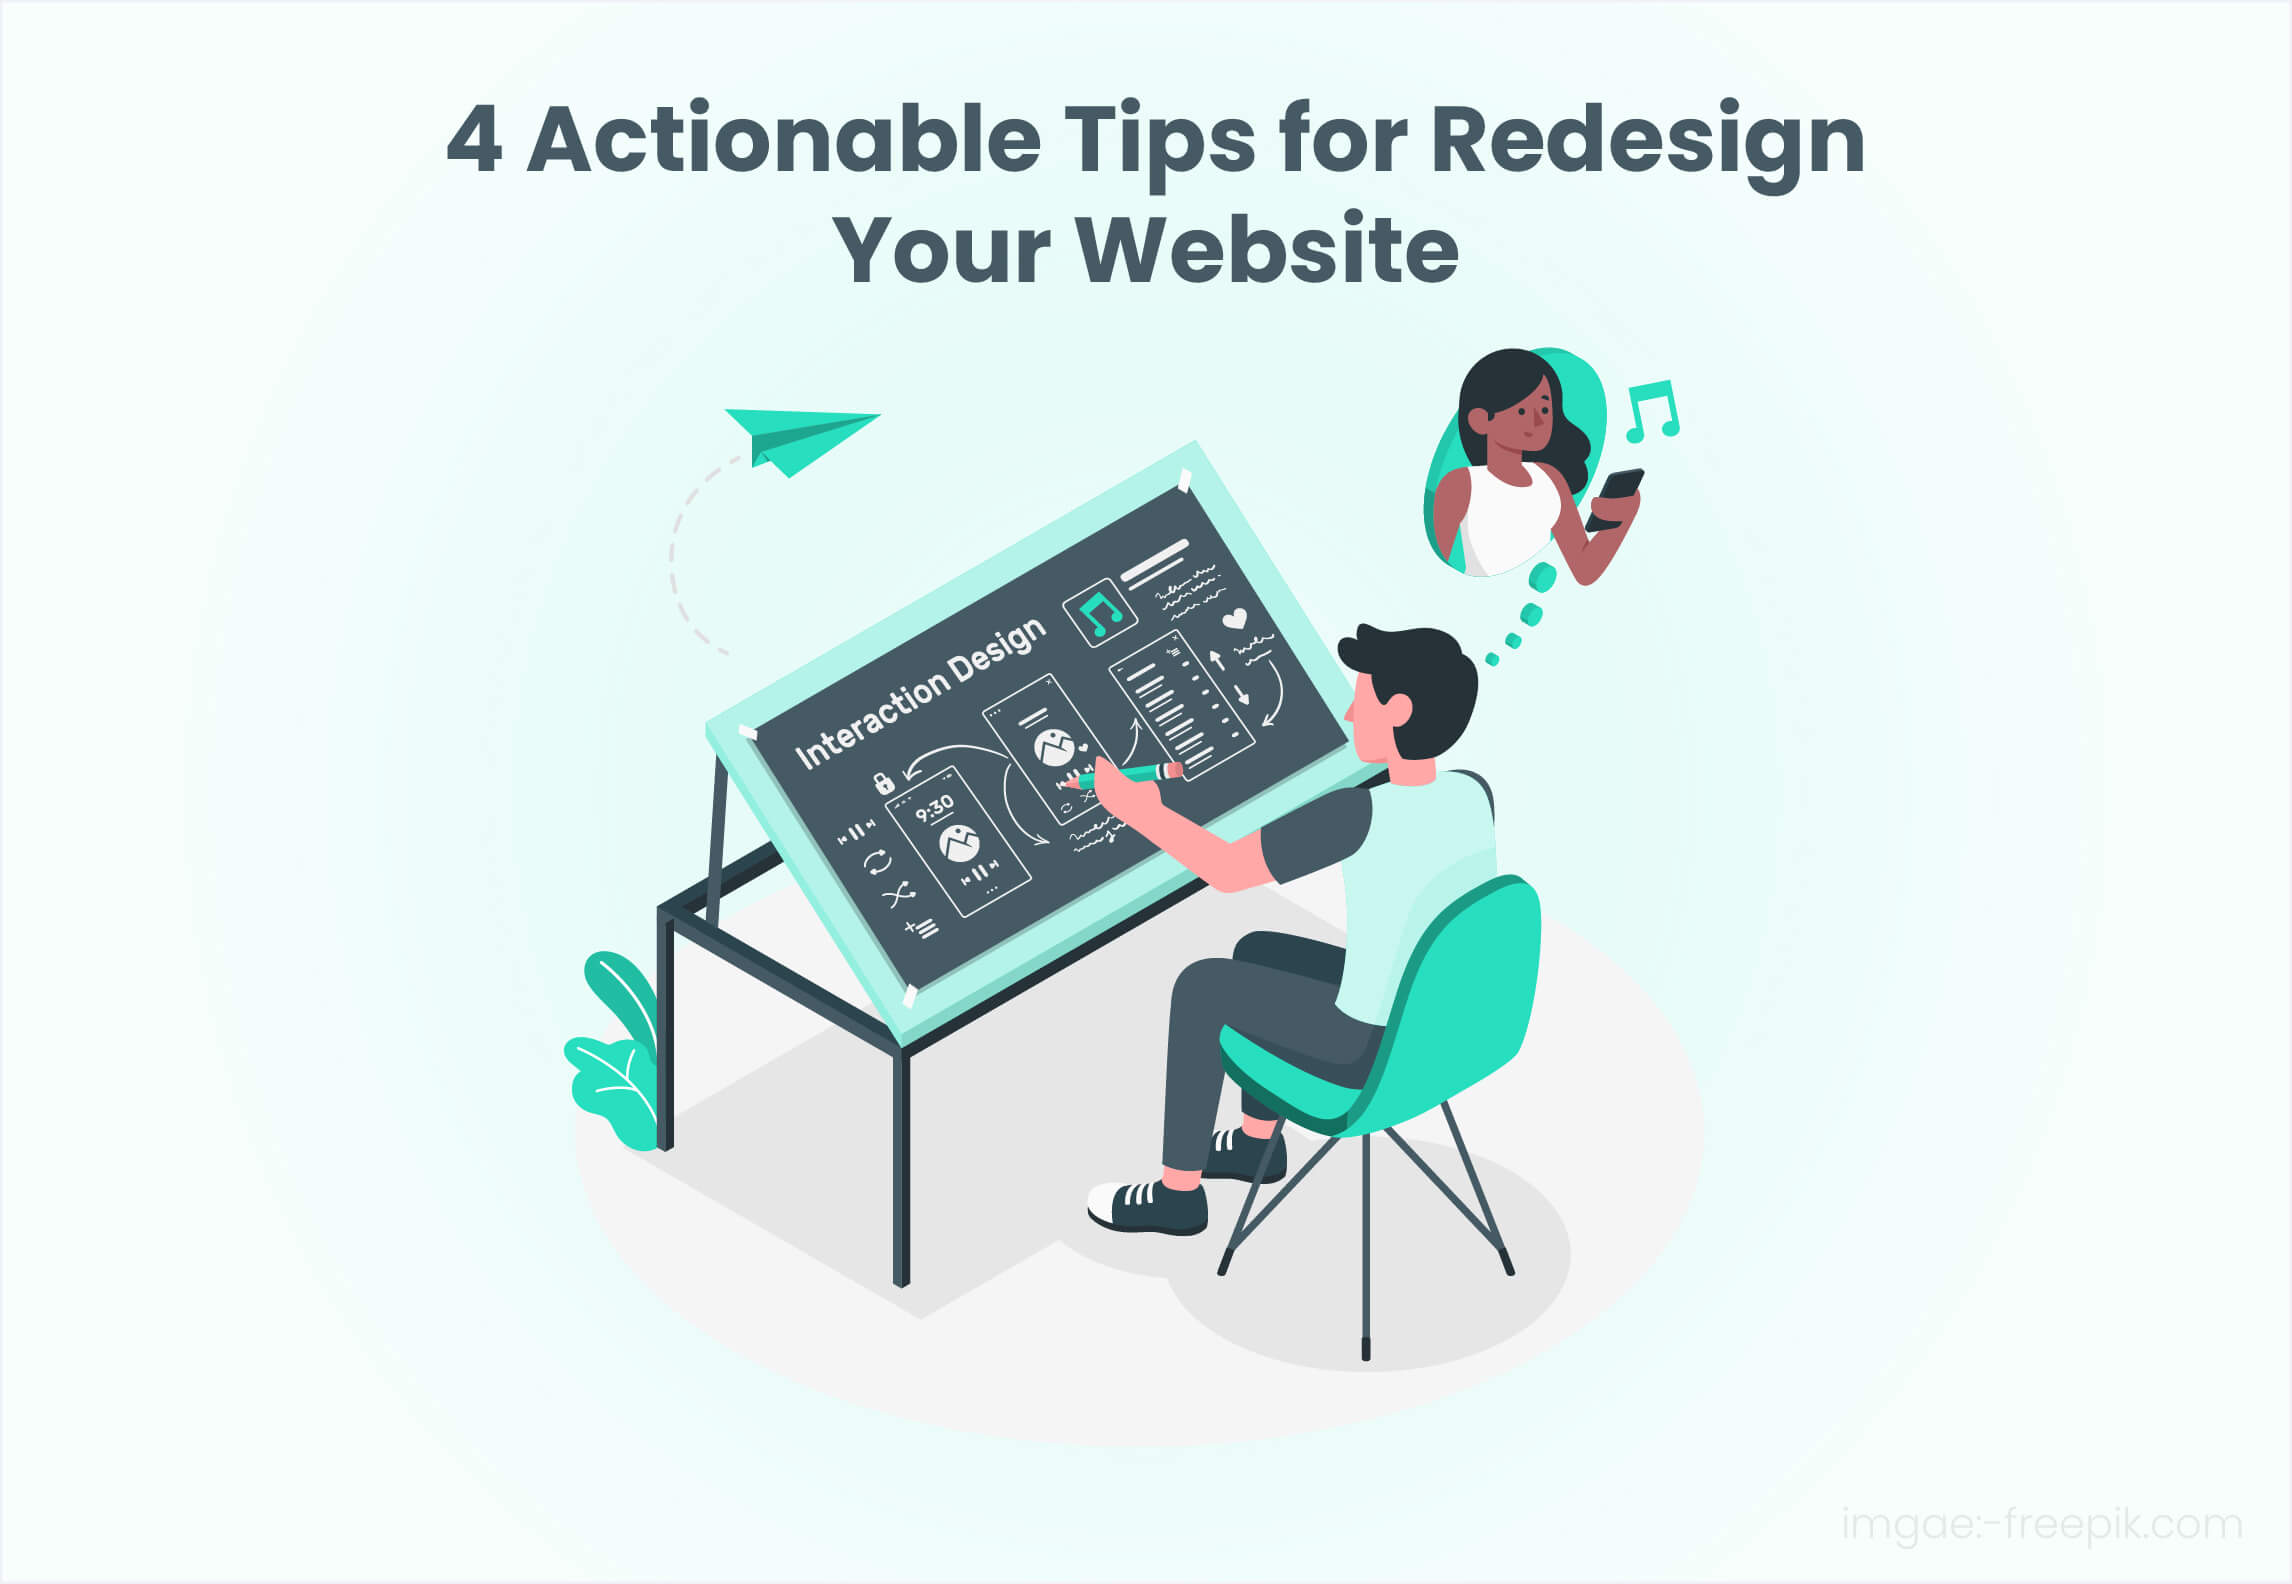 Redesign your website with these Top 4 Actionable Tips